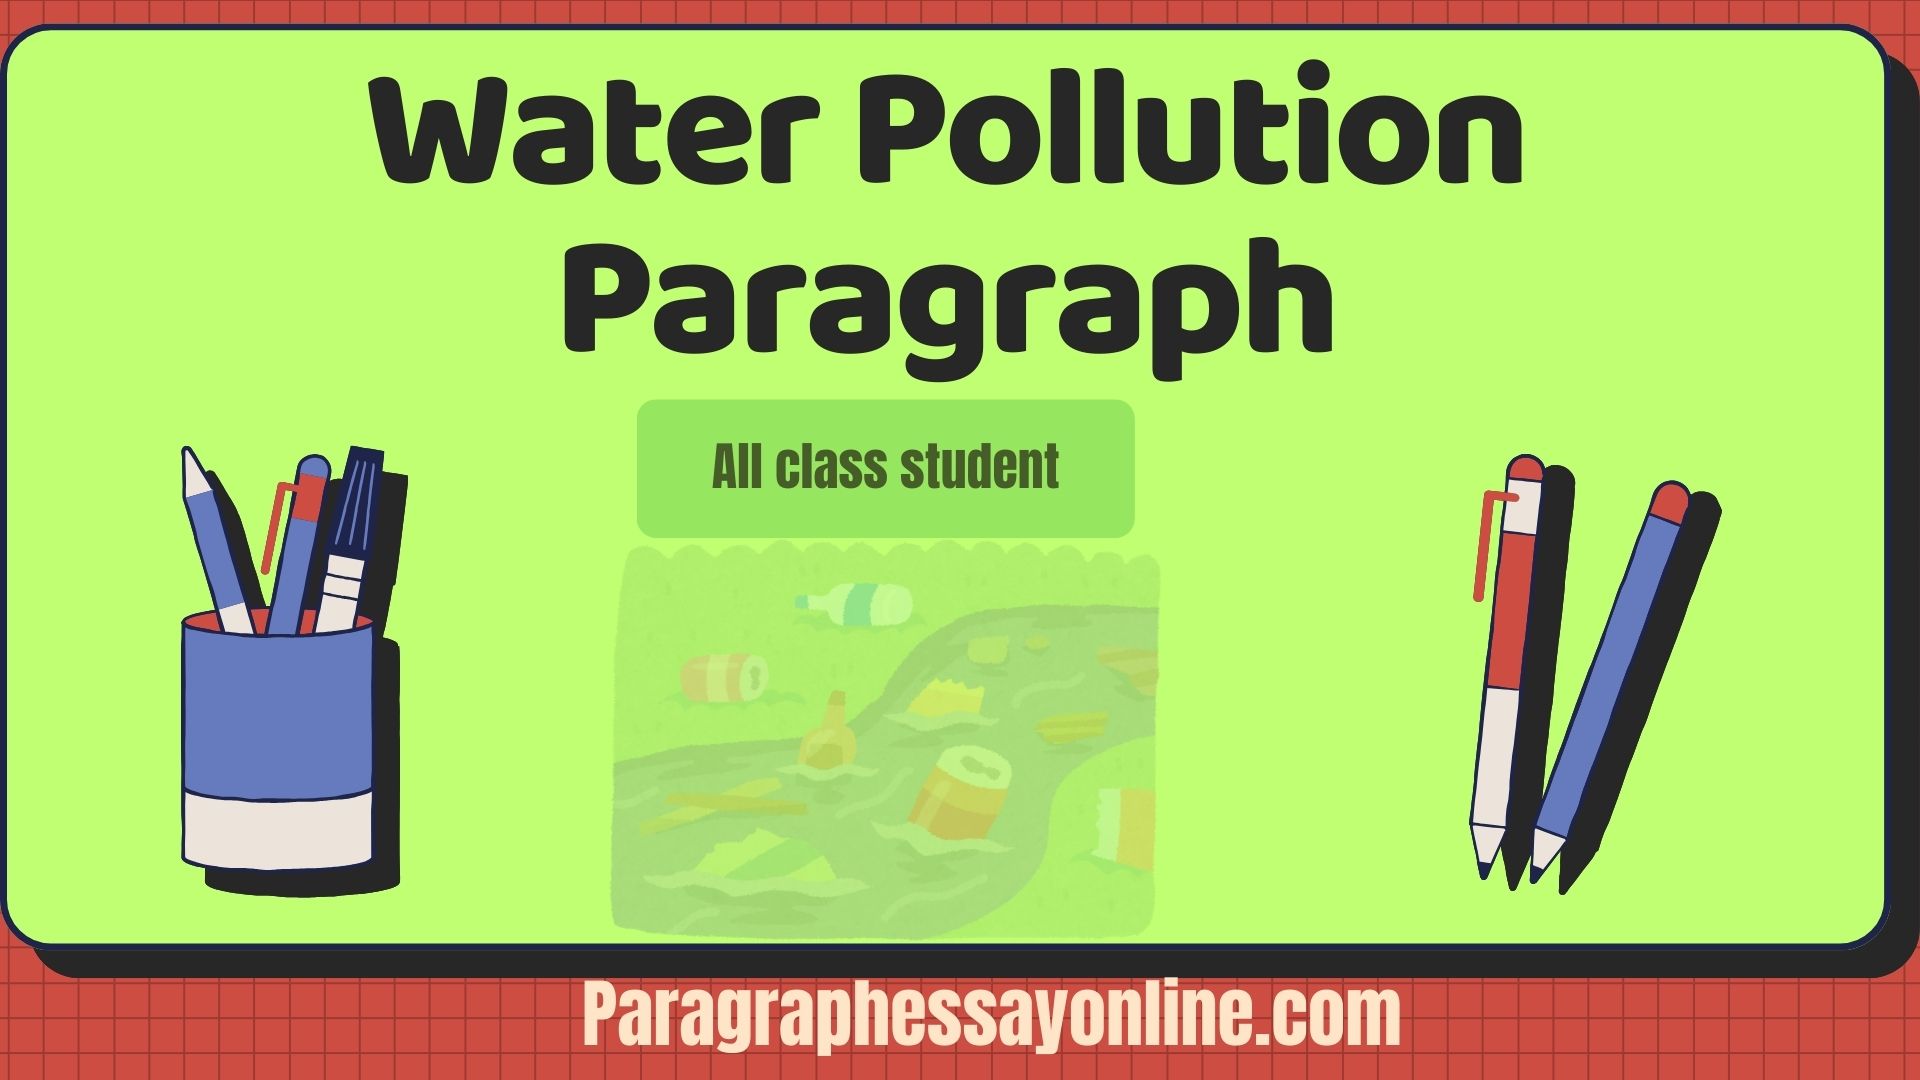 Water Pollution Paragraph